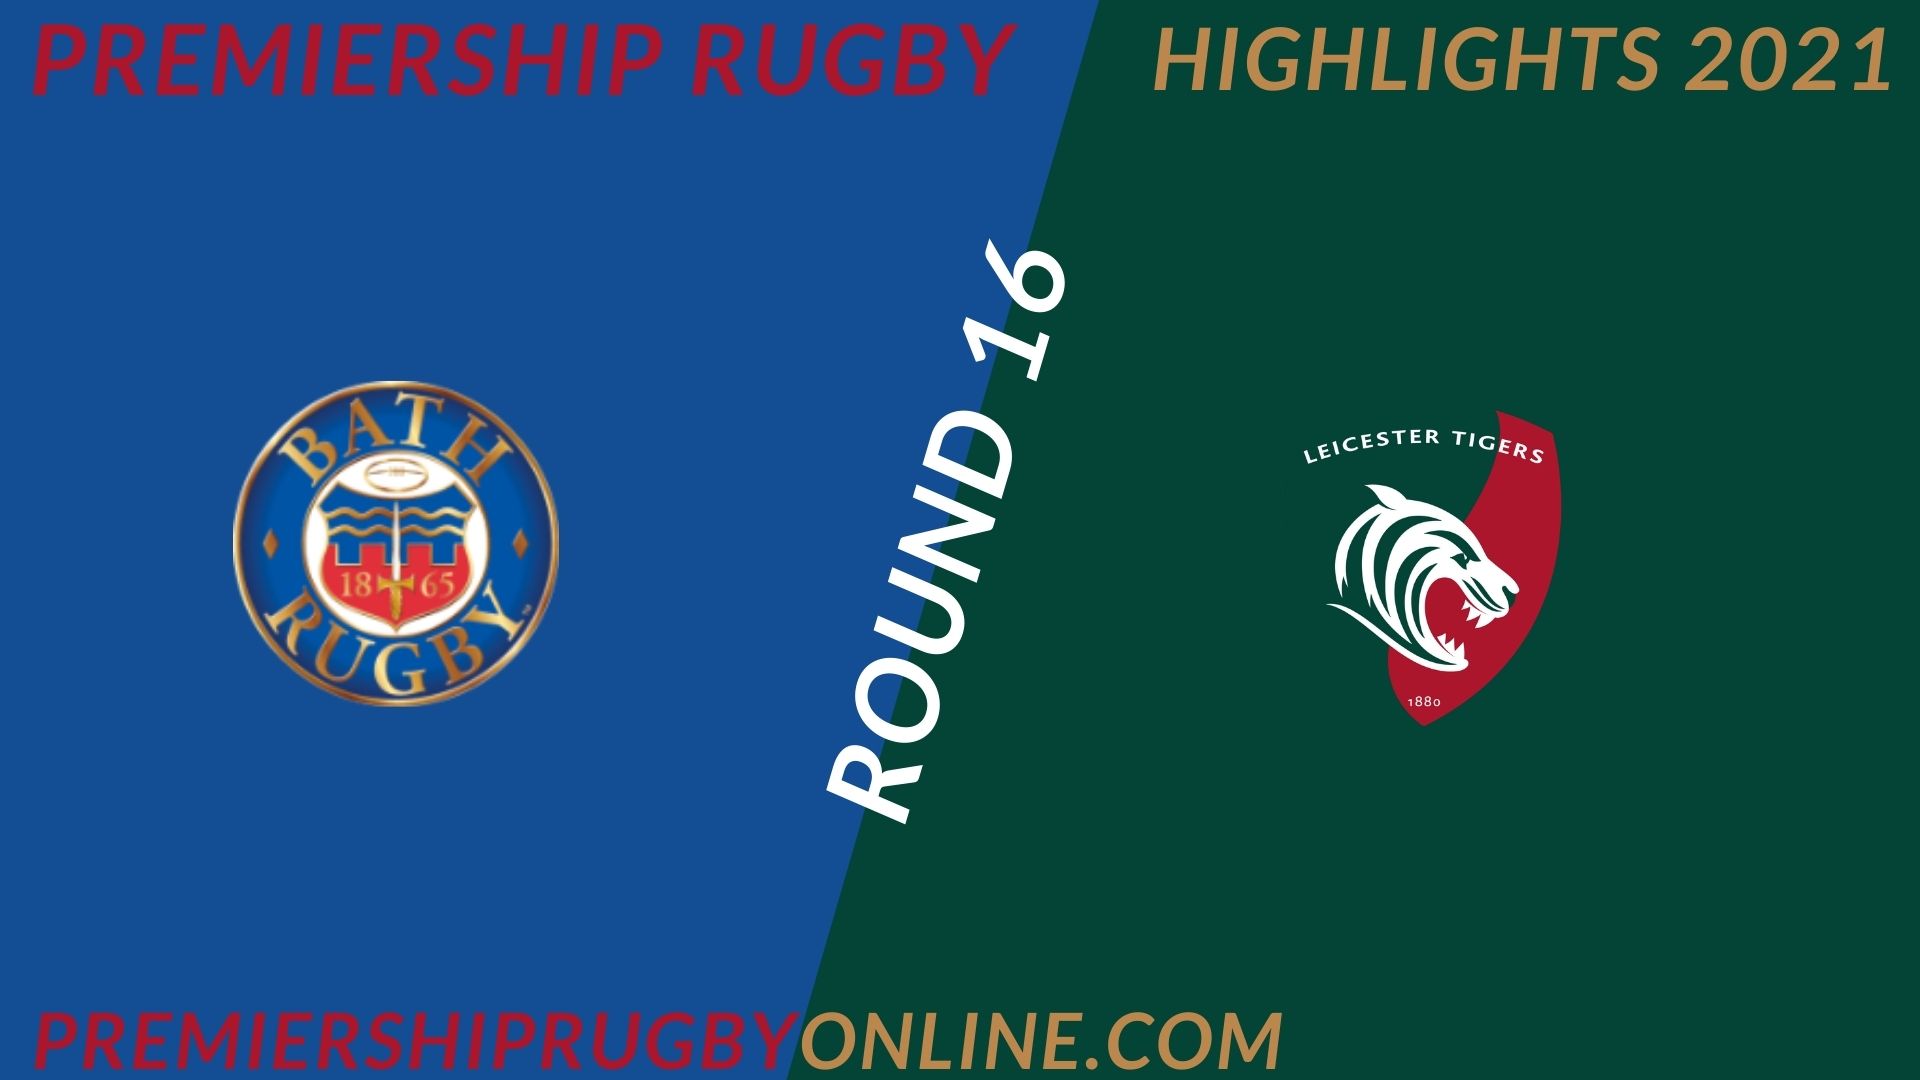 Bath Rugby Vs Leicester Tigers Highlights 2021 RD 16